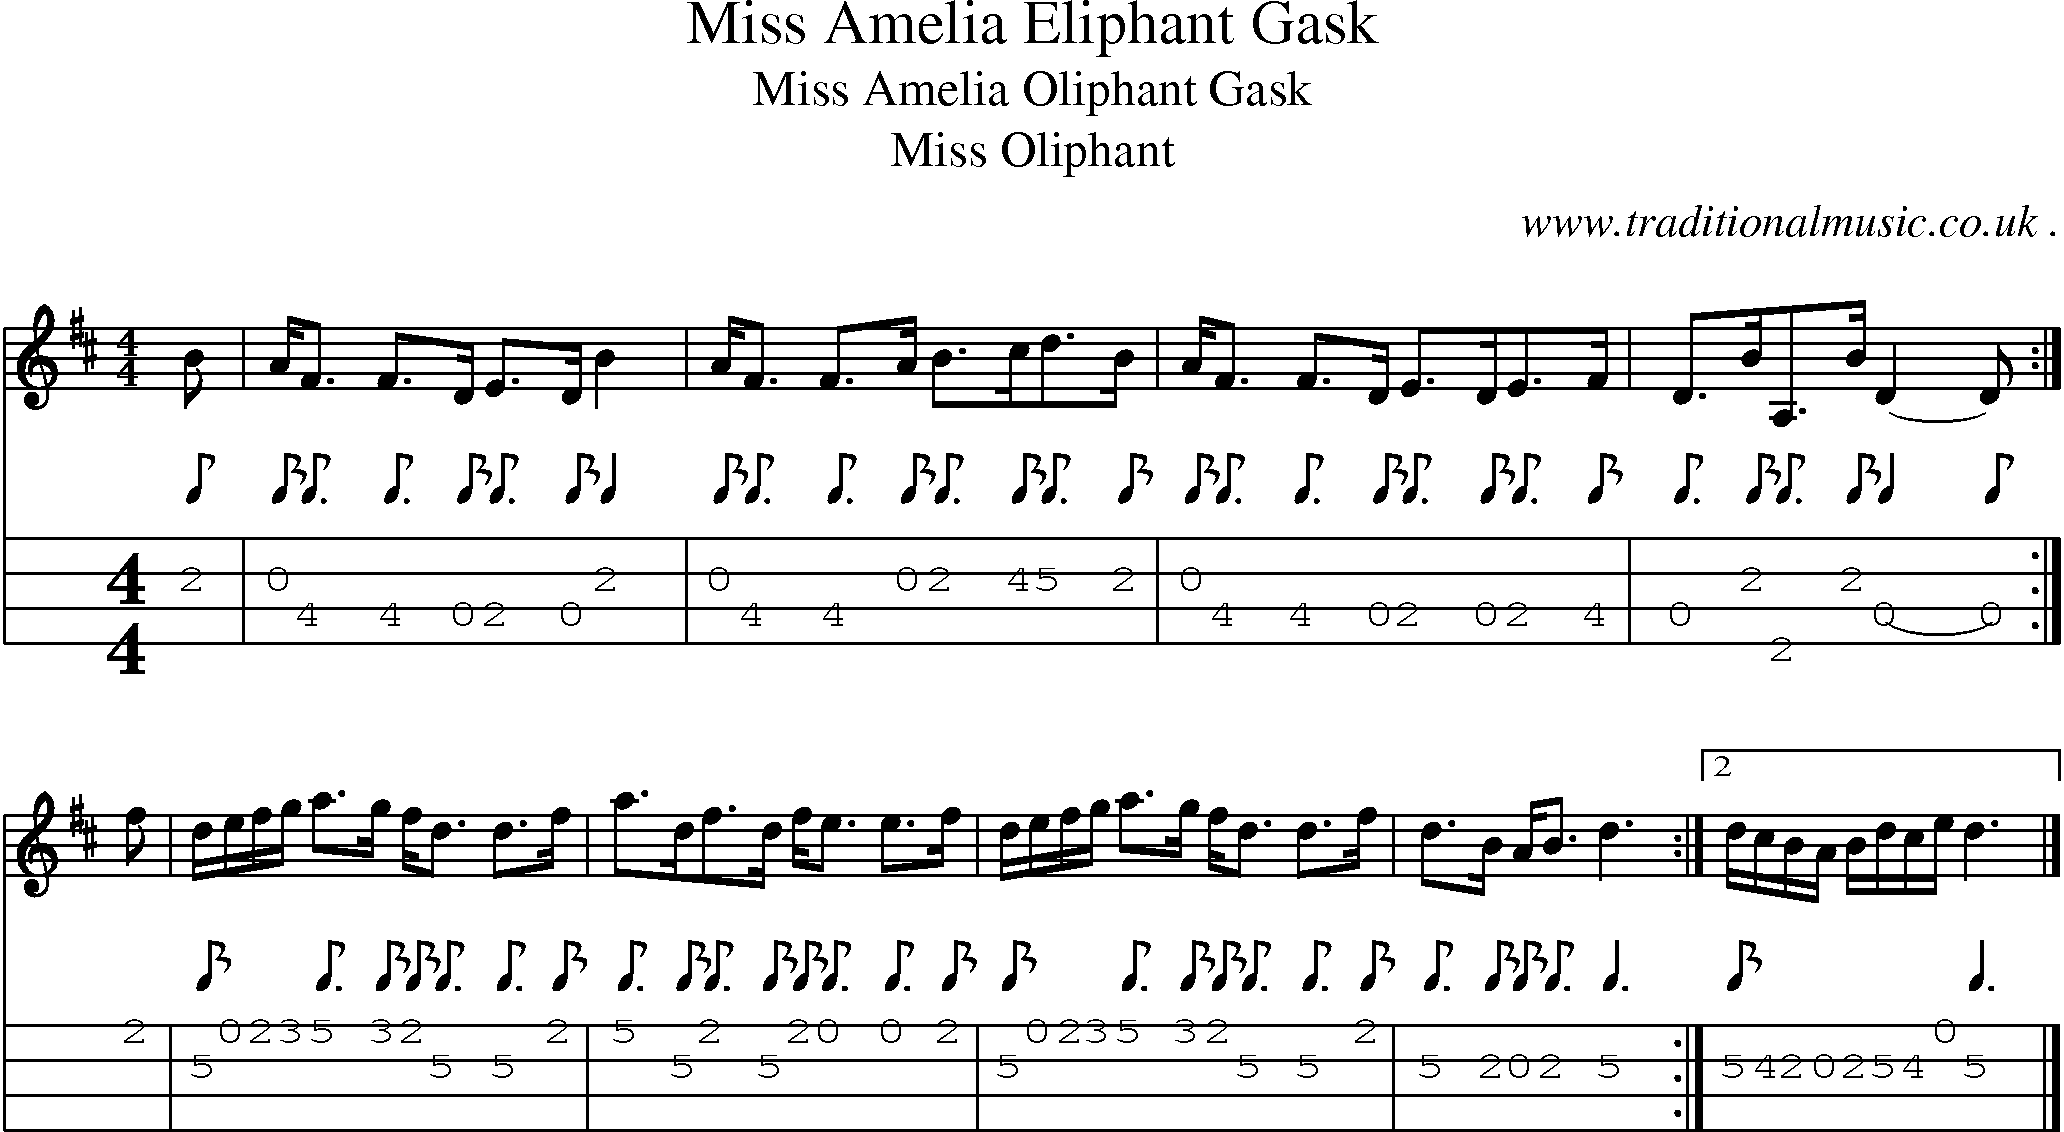 Sheet-music  score, Chords and Mandolin Tabs for Miss Amelia Eliphant Gask